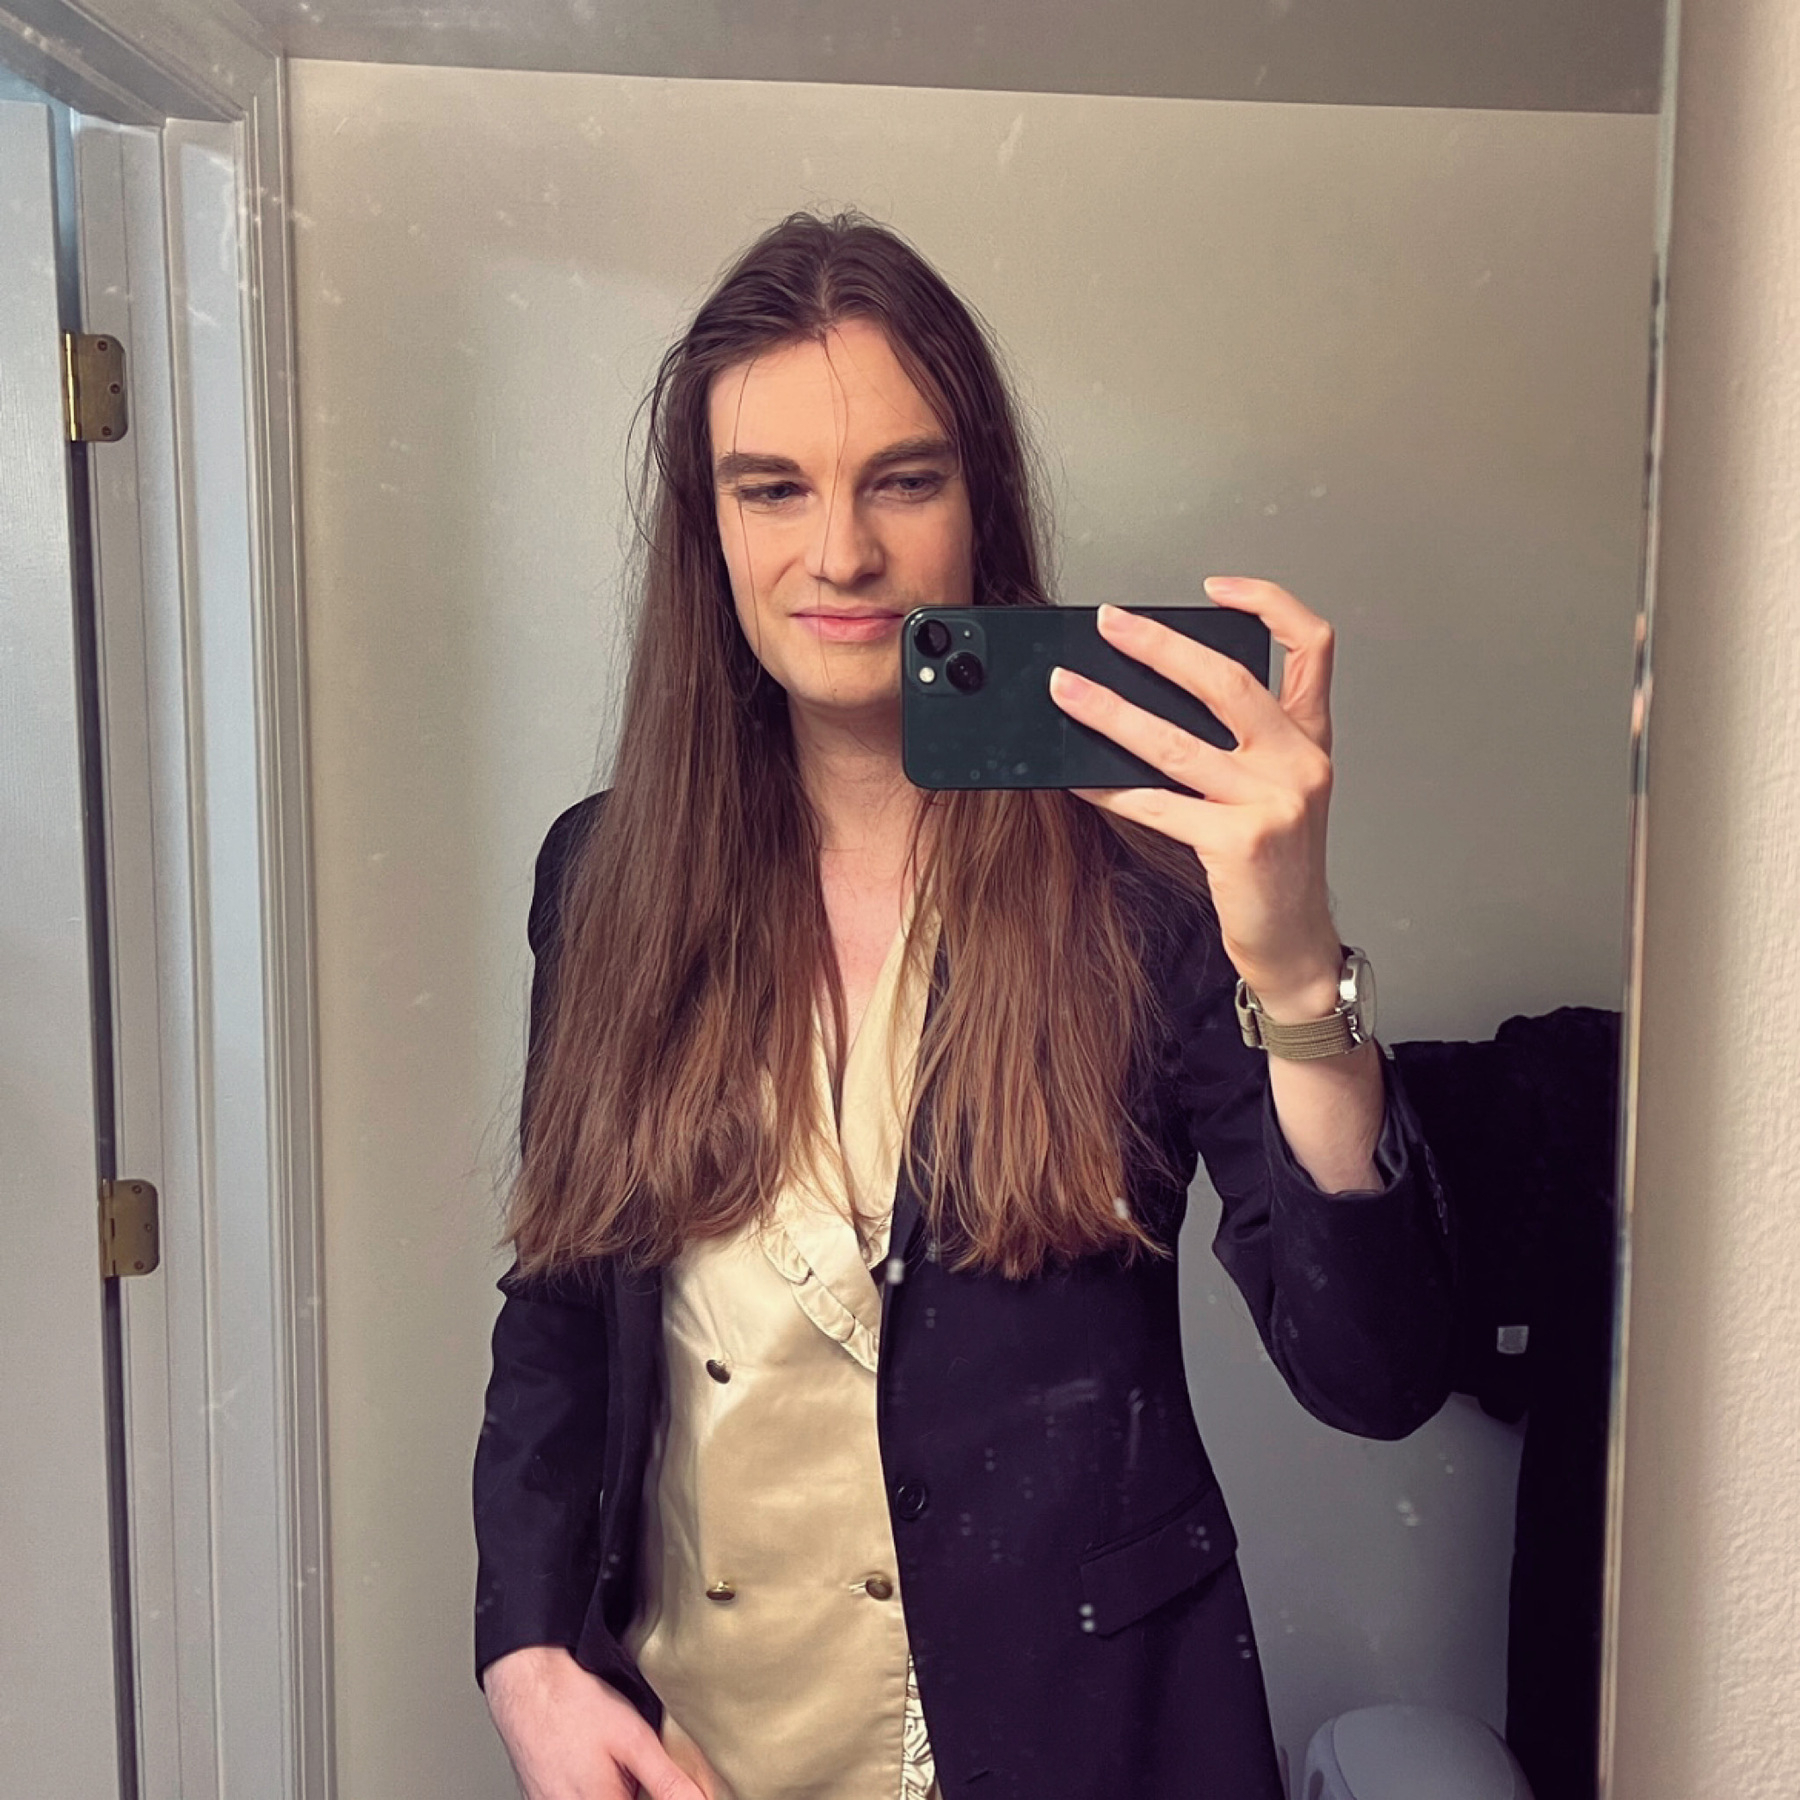 Hunter wears a champagne satin shirt and black blazer. His long brown hair is about as brushed as it ever gets. H'es a pretty pale, androgynous-looking guy.